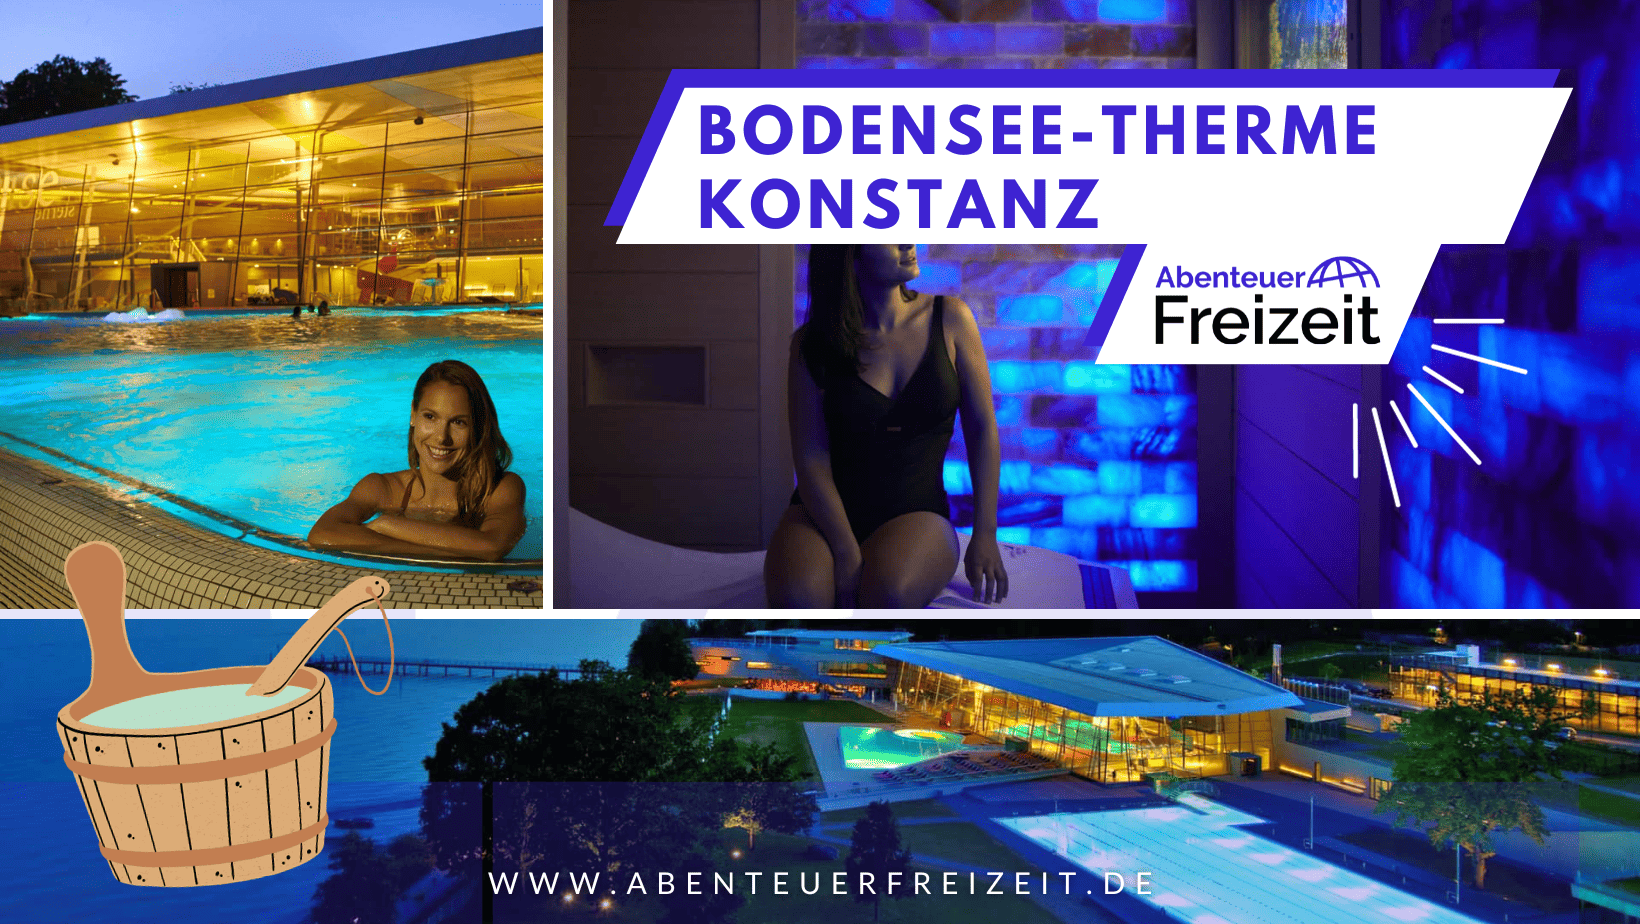 Bodensee-Therme Konstanz, Therme in Baden-Württemberg